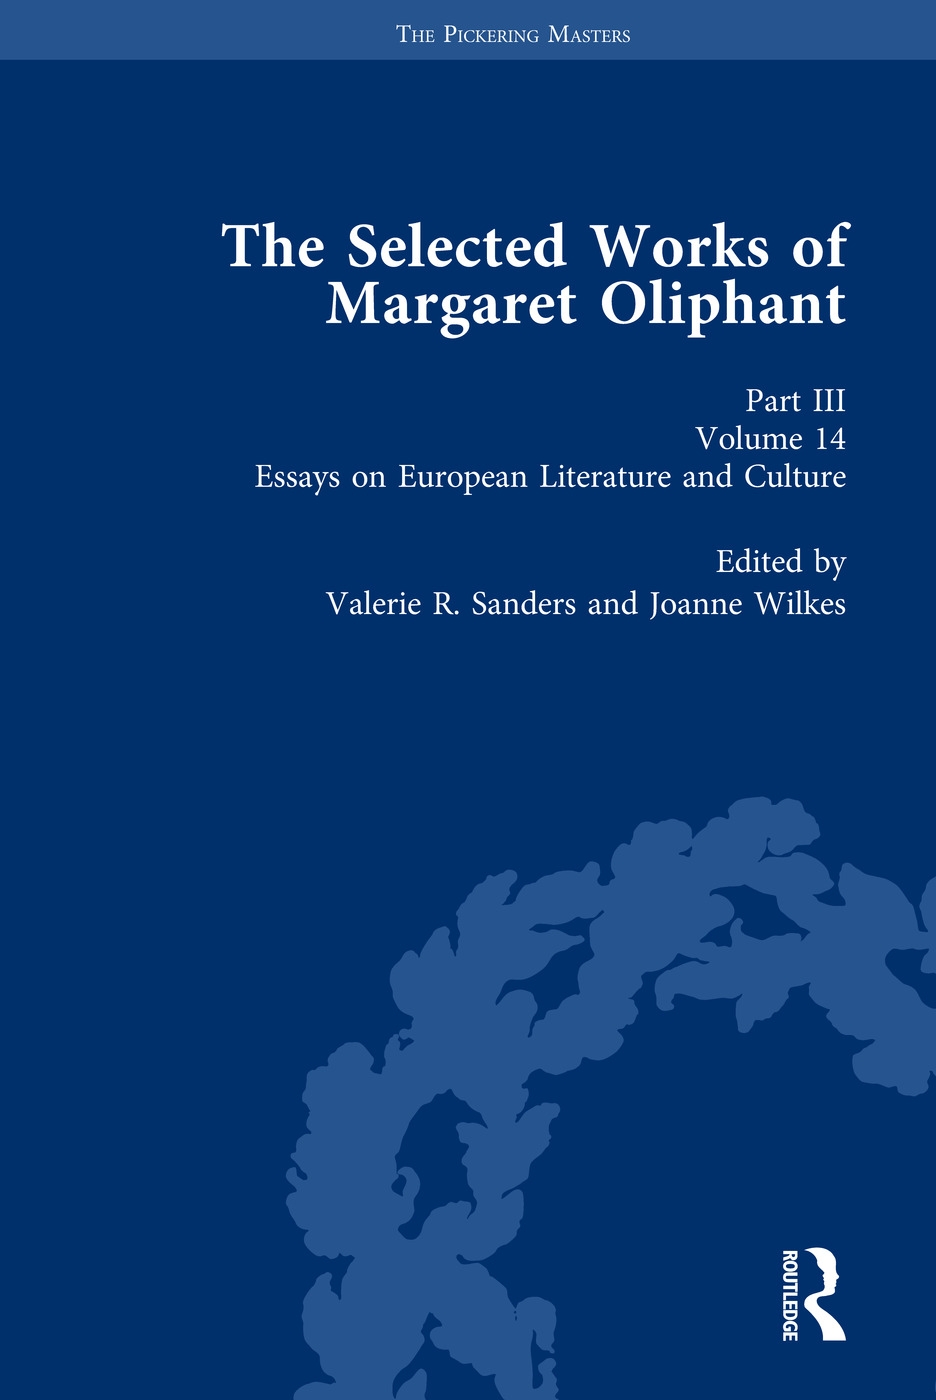 The Selected Works of Margaret Oliphant, Part III Volume 14: Essays on European Literature and Culture